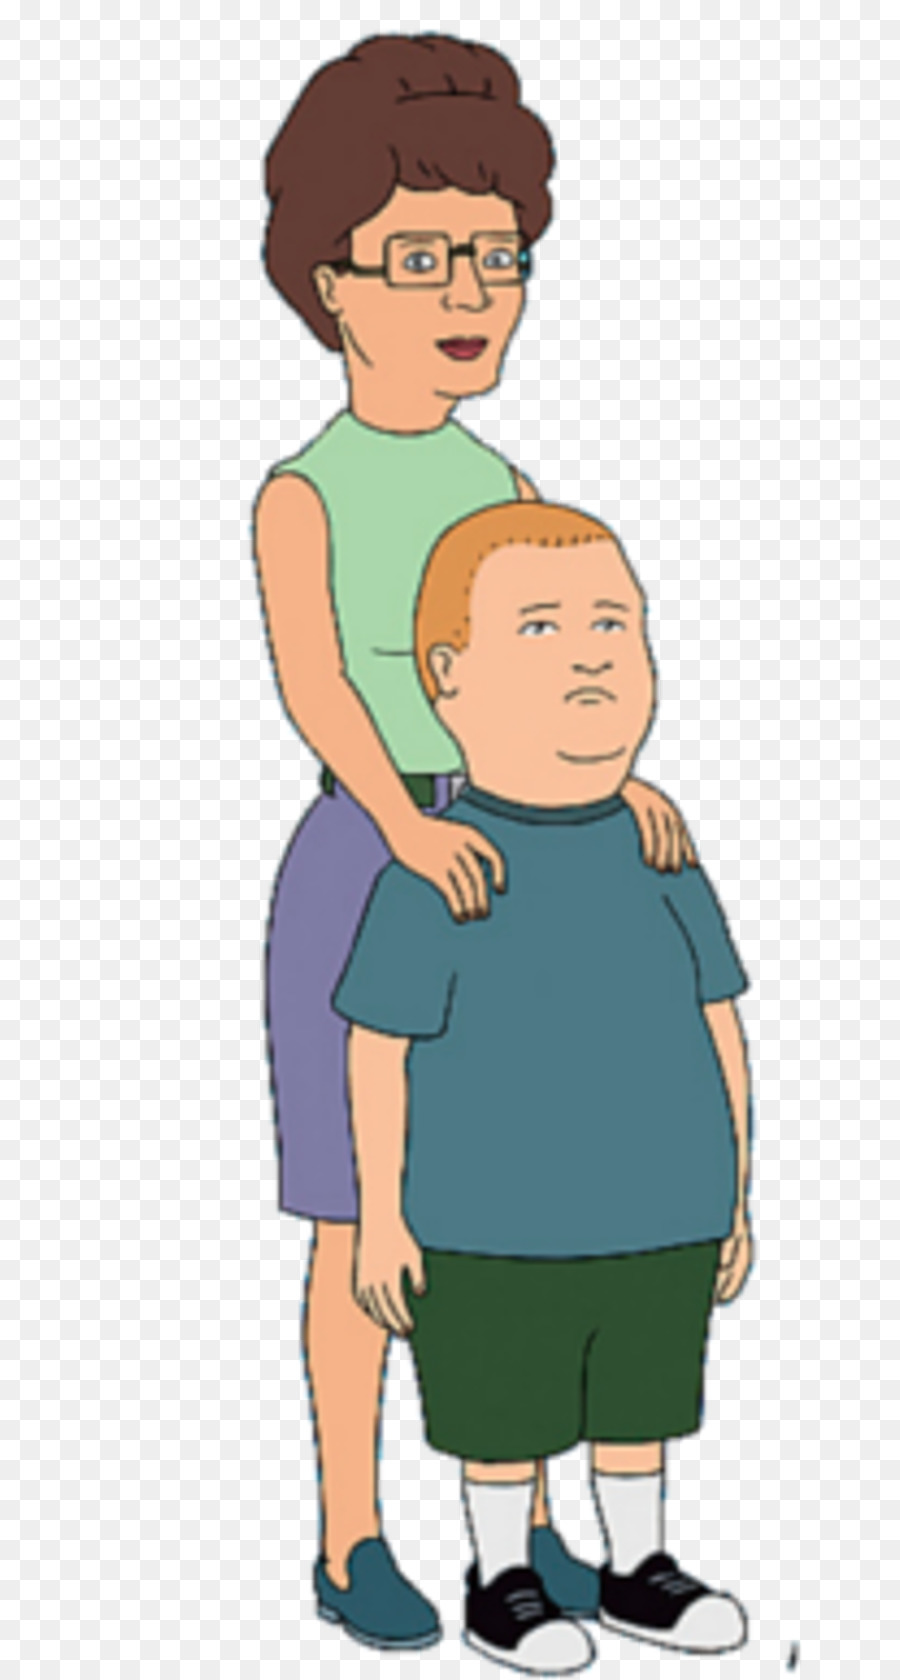 Mike Richter King of the Hill Bobby Hill Peggy Hill Hank Hill - Die Simpsons